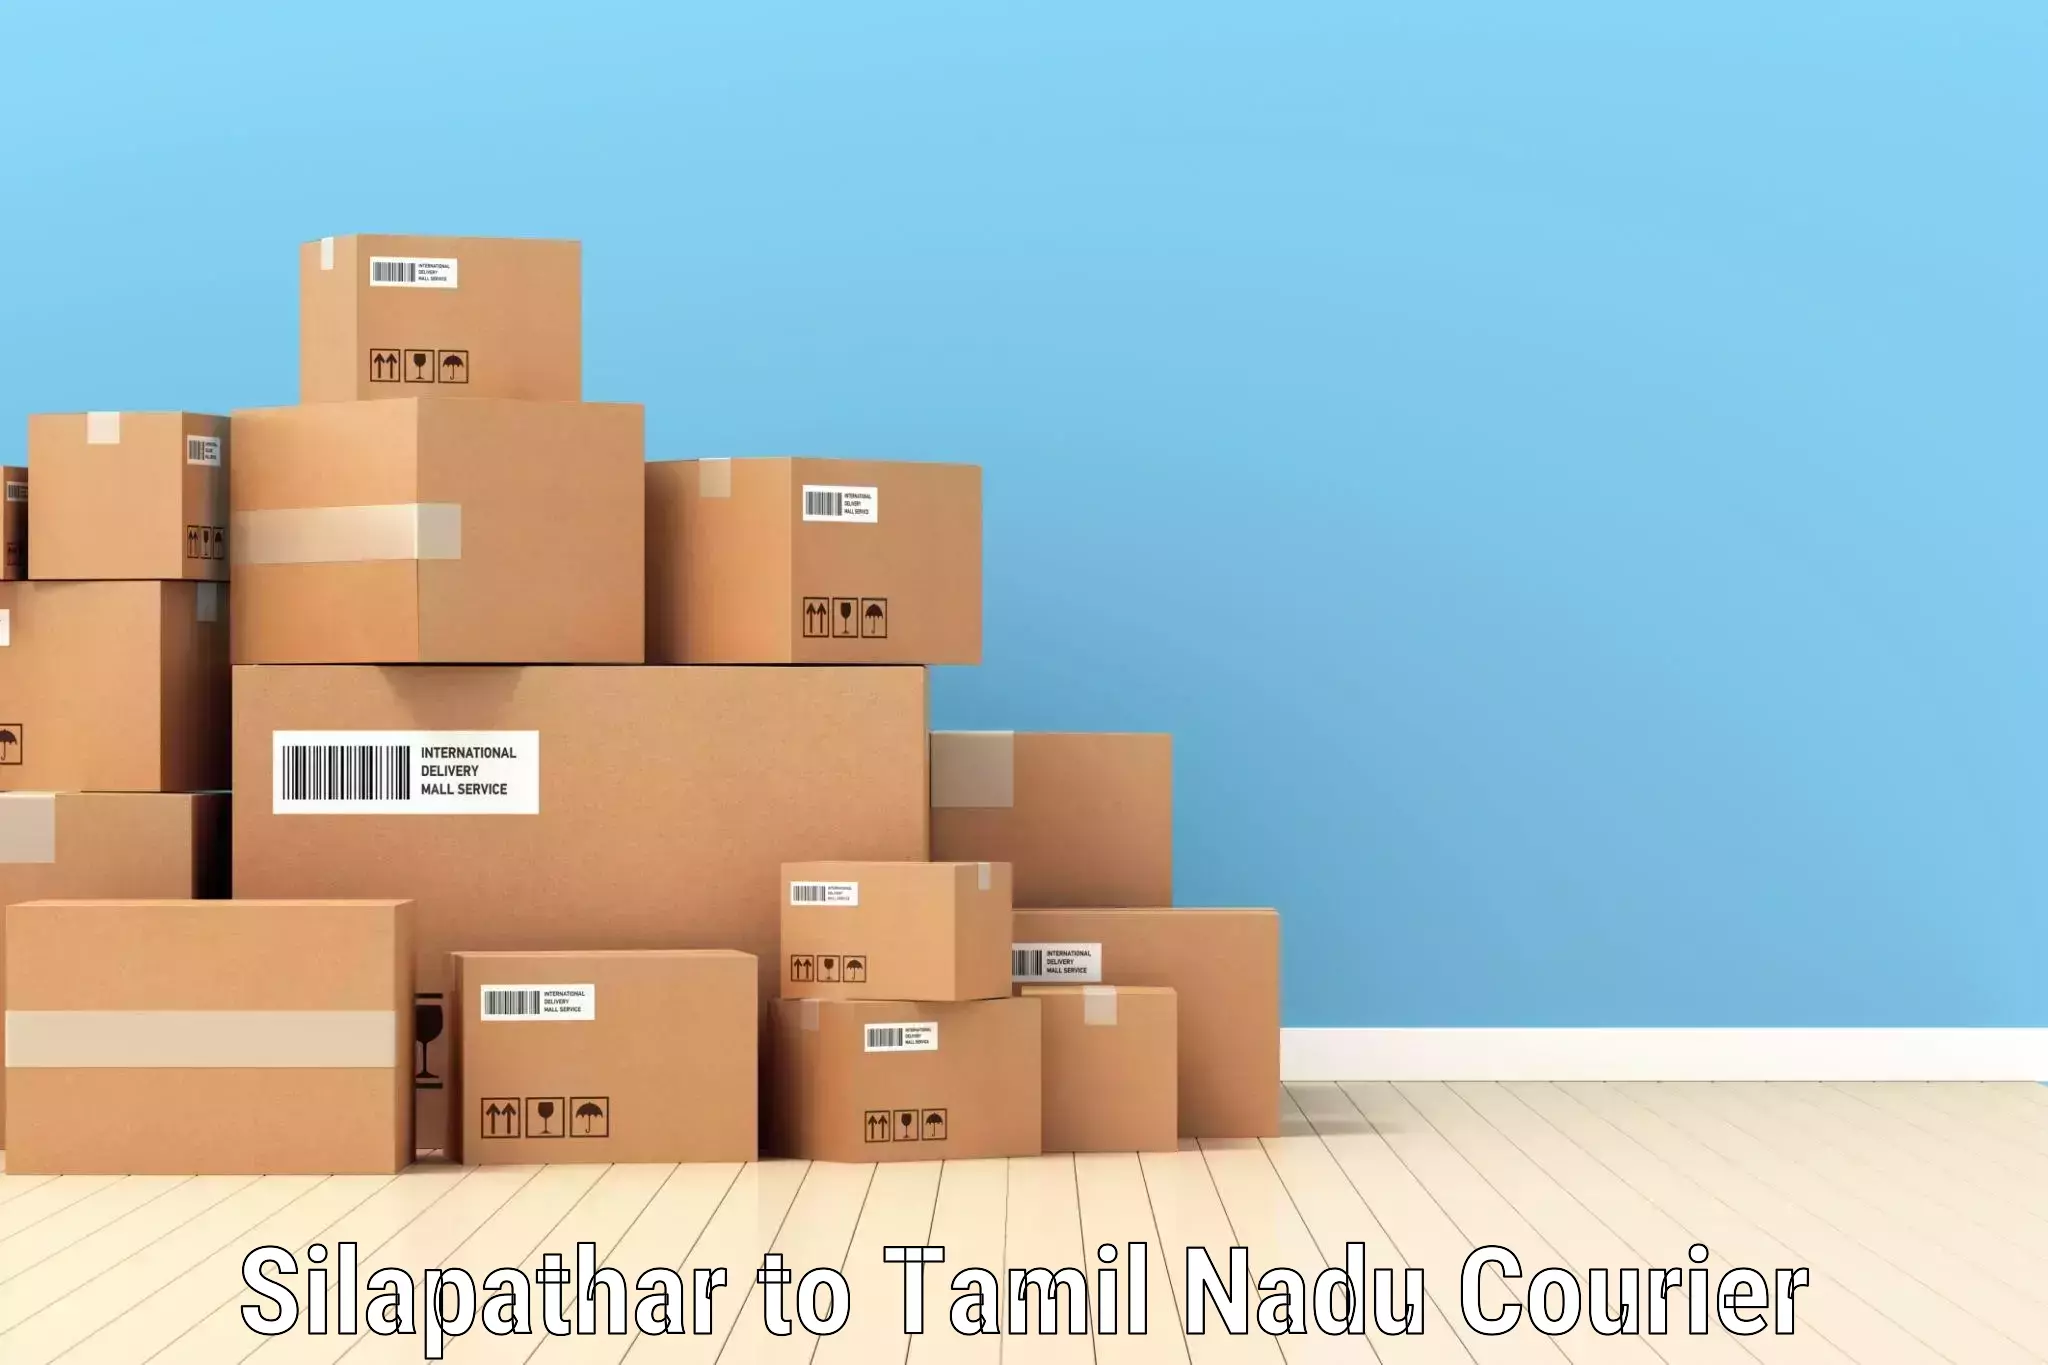 Business courier solutions Silapathar to Neyveli